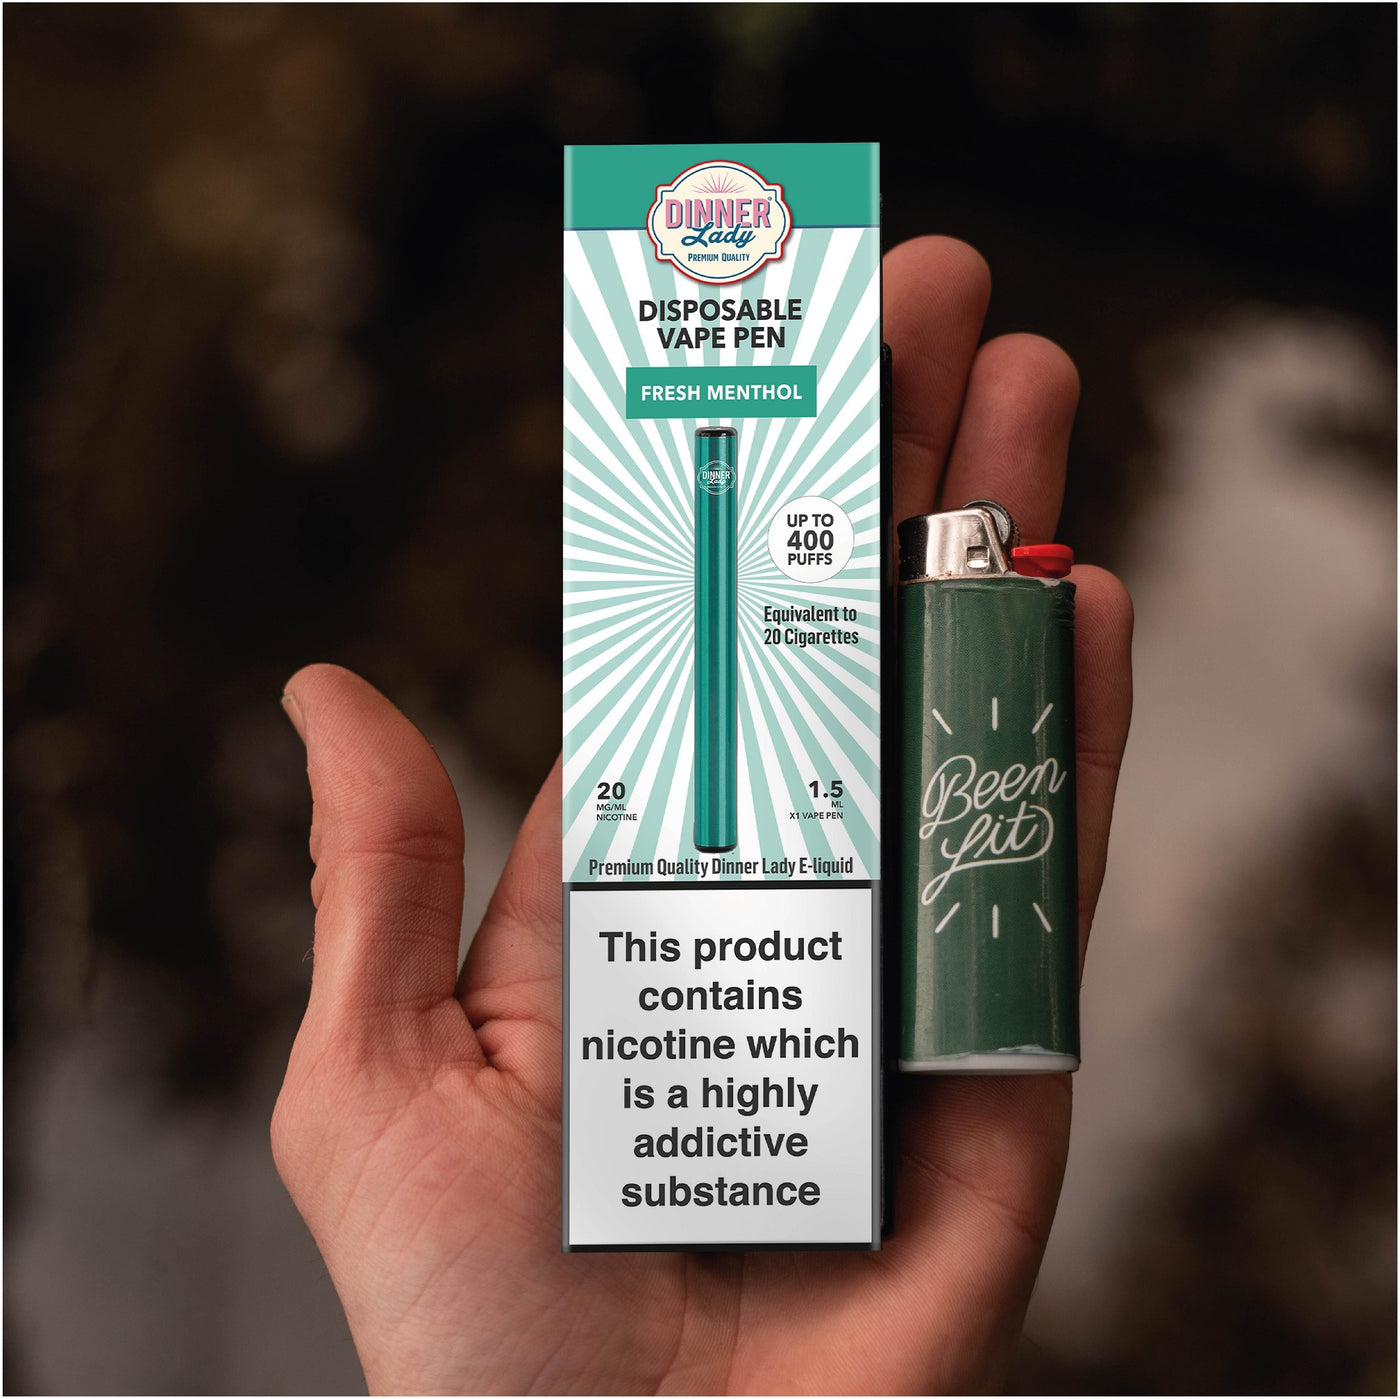 THE MENTHOL BAN - ONE YEAR ON